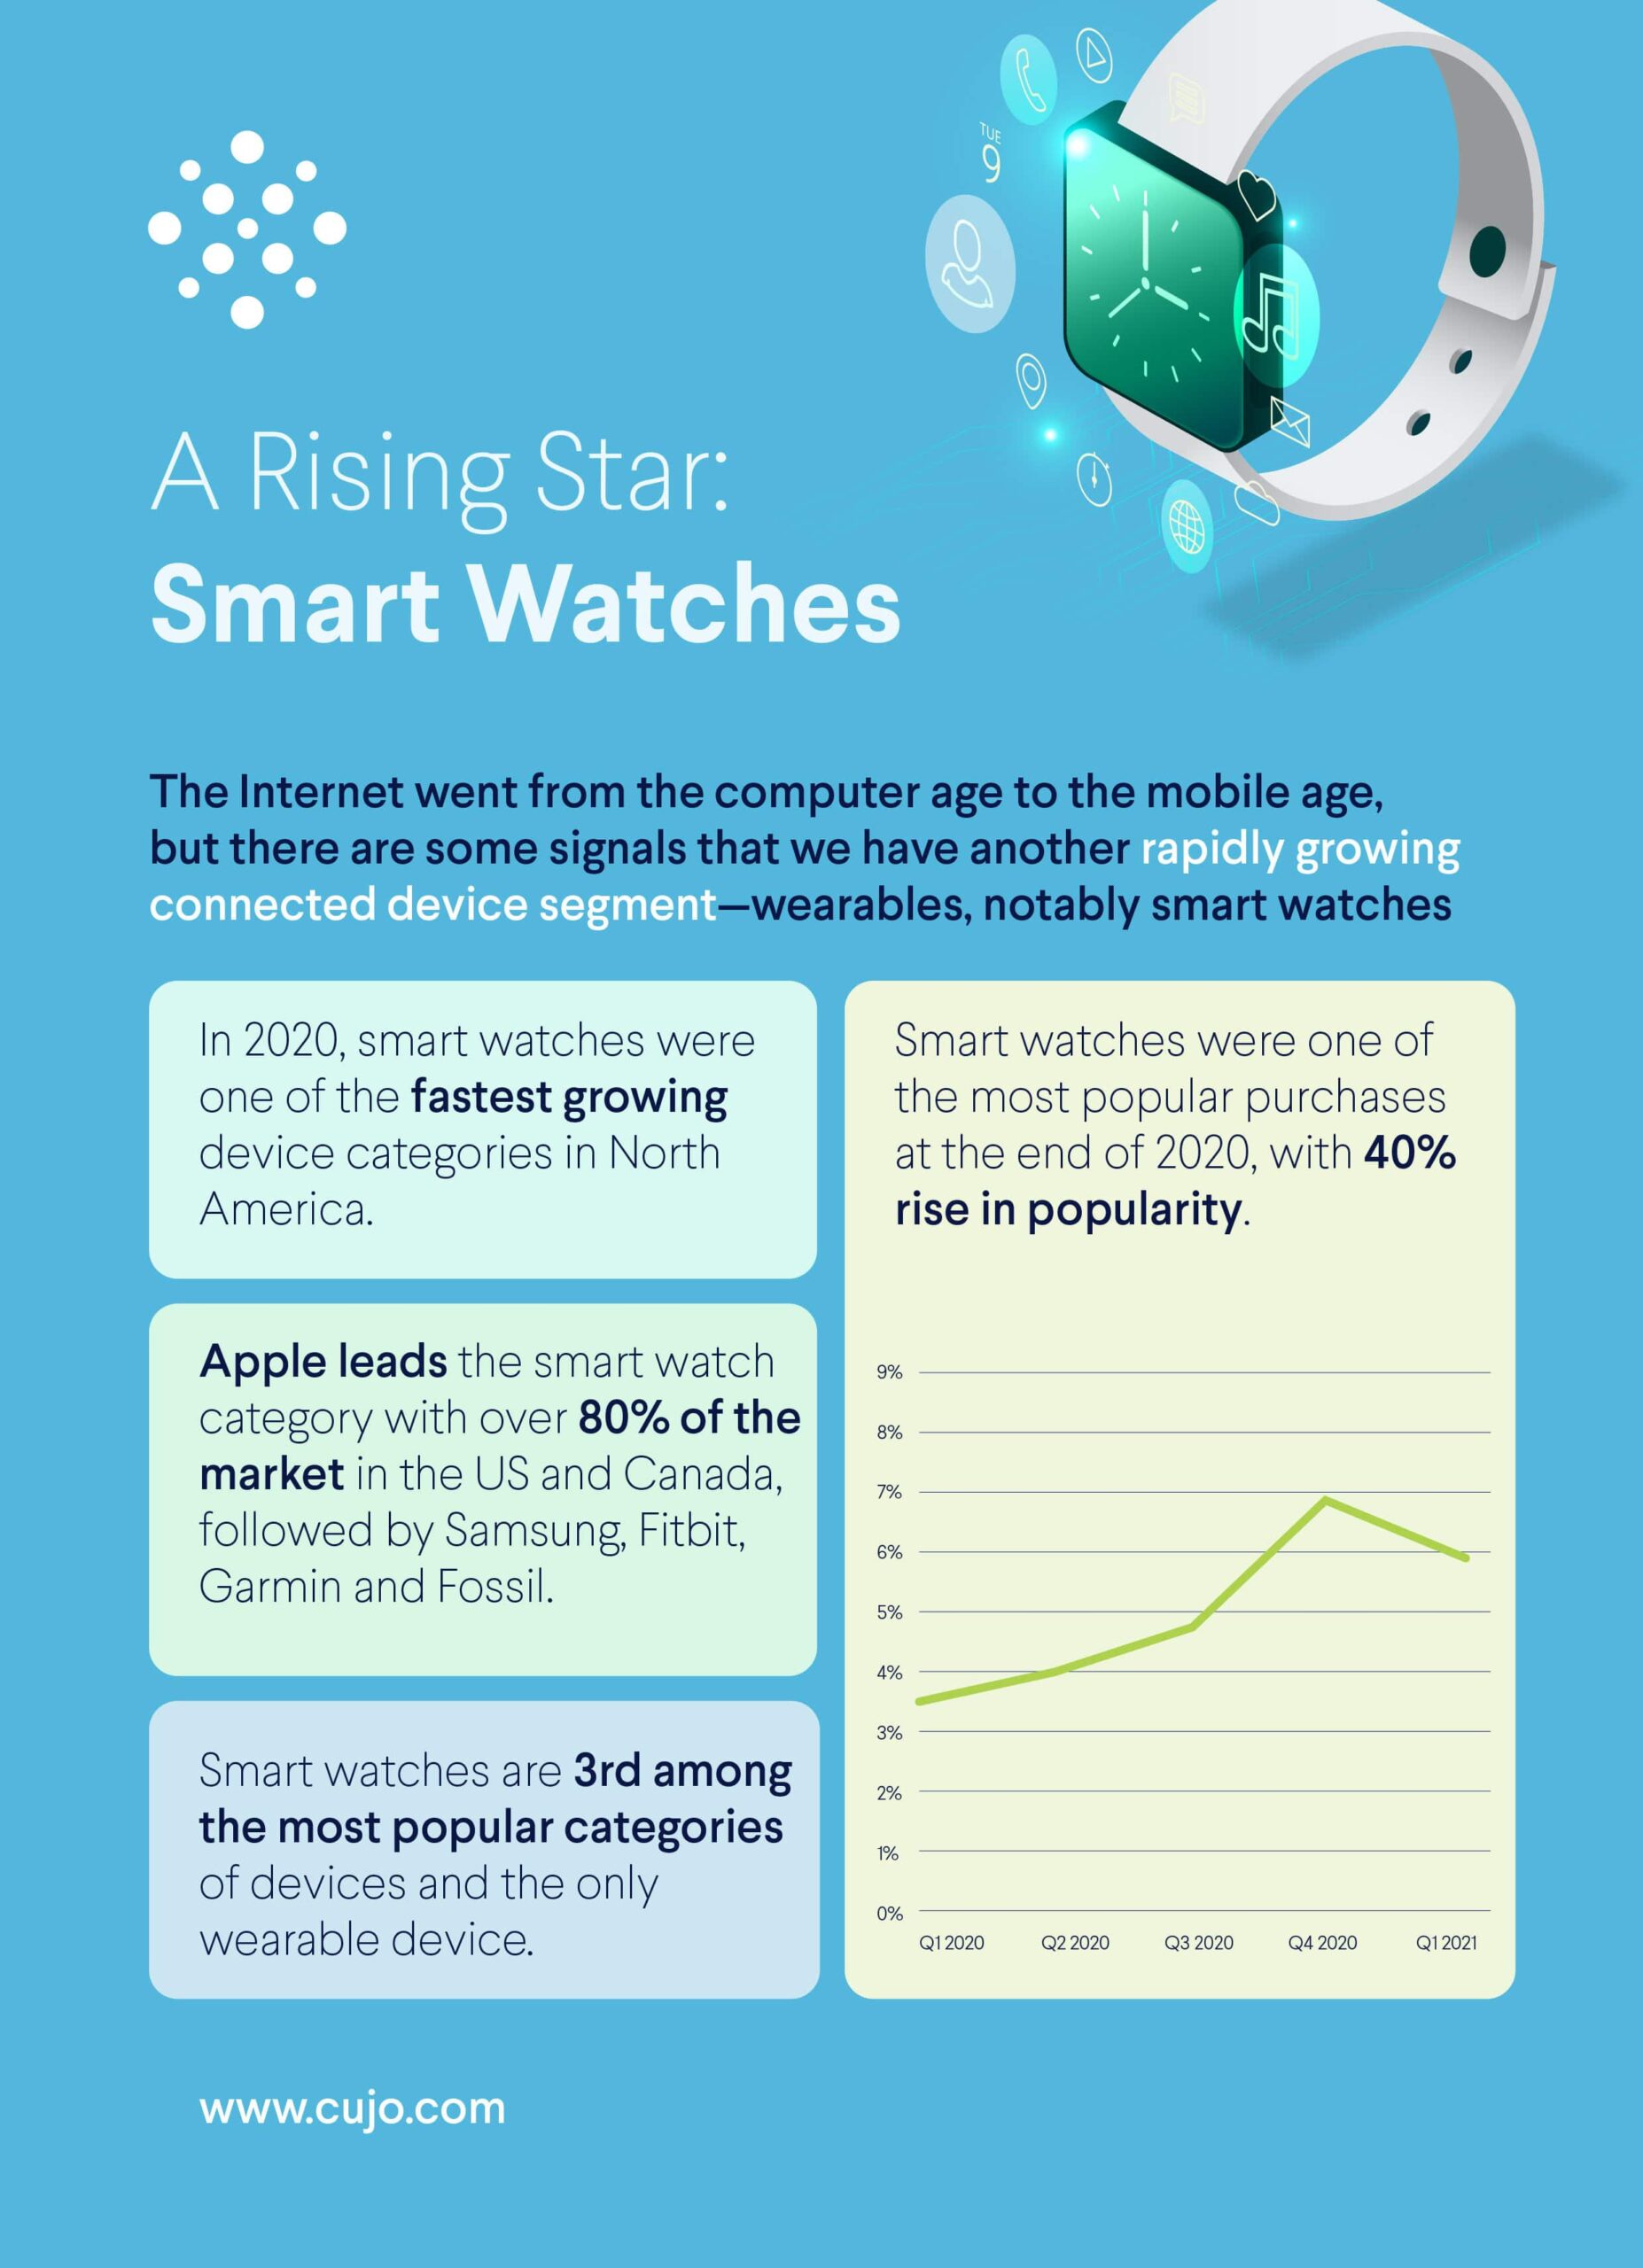 Smart watches are the most popular IoT devices